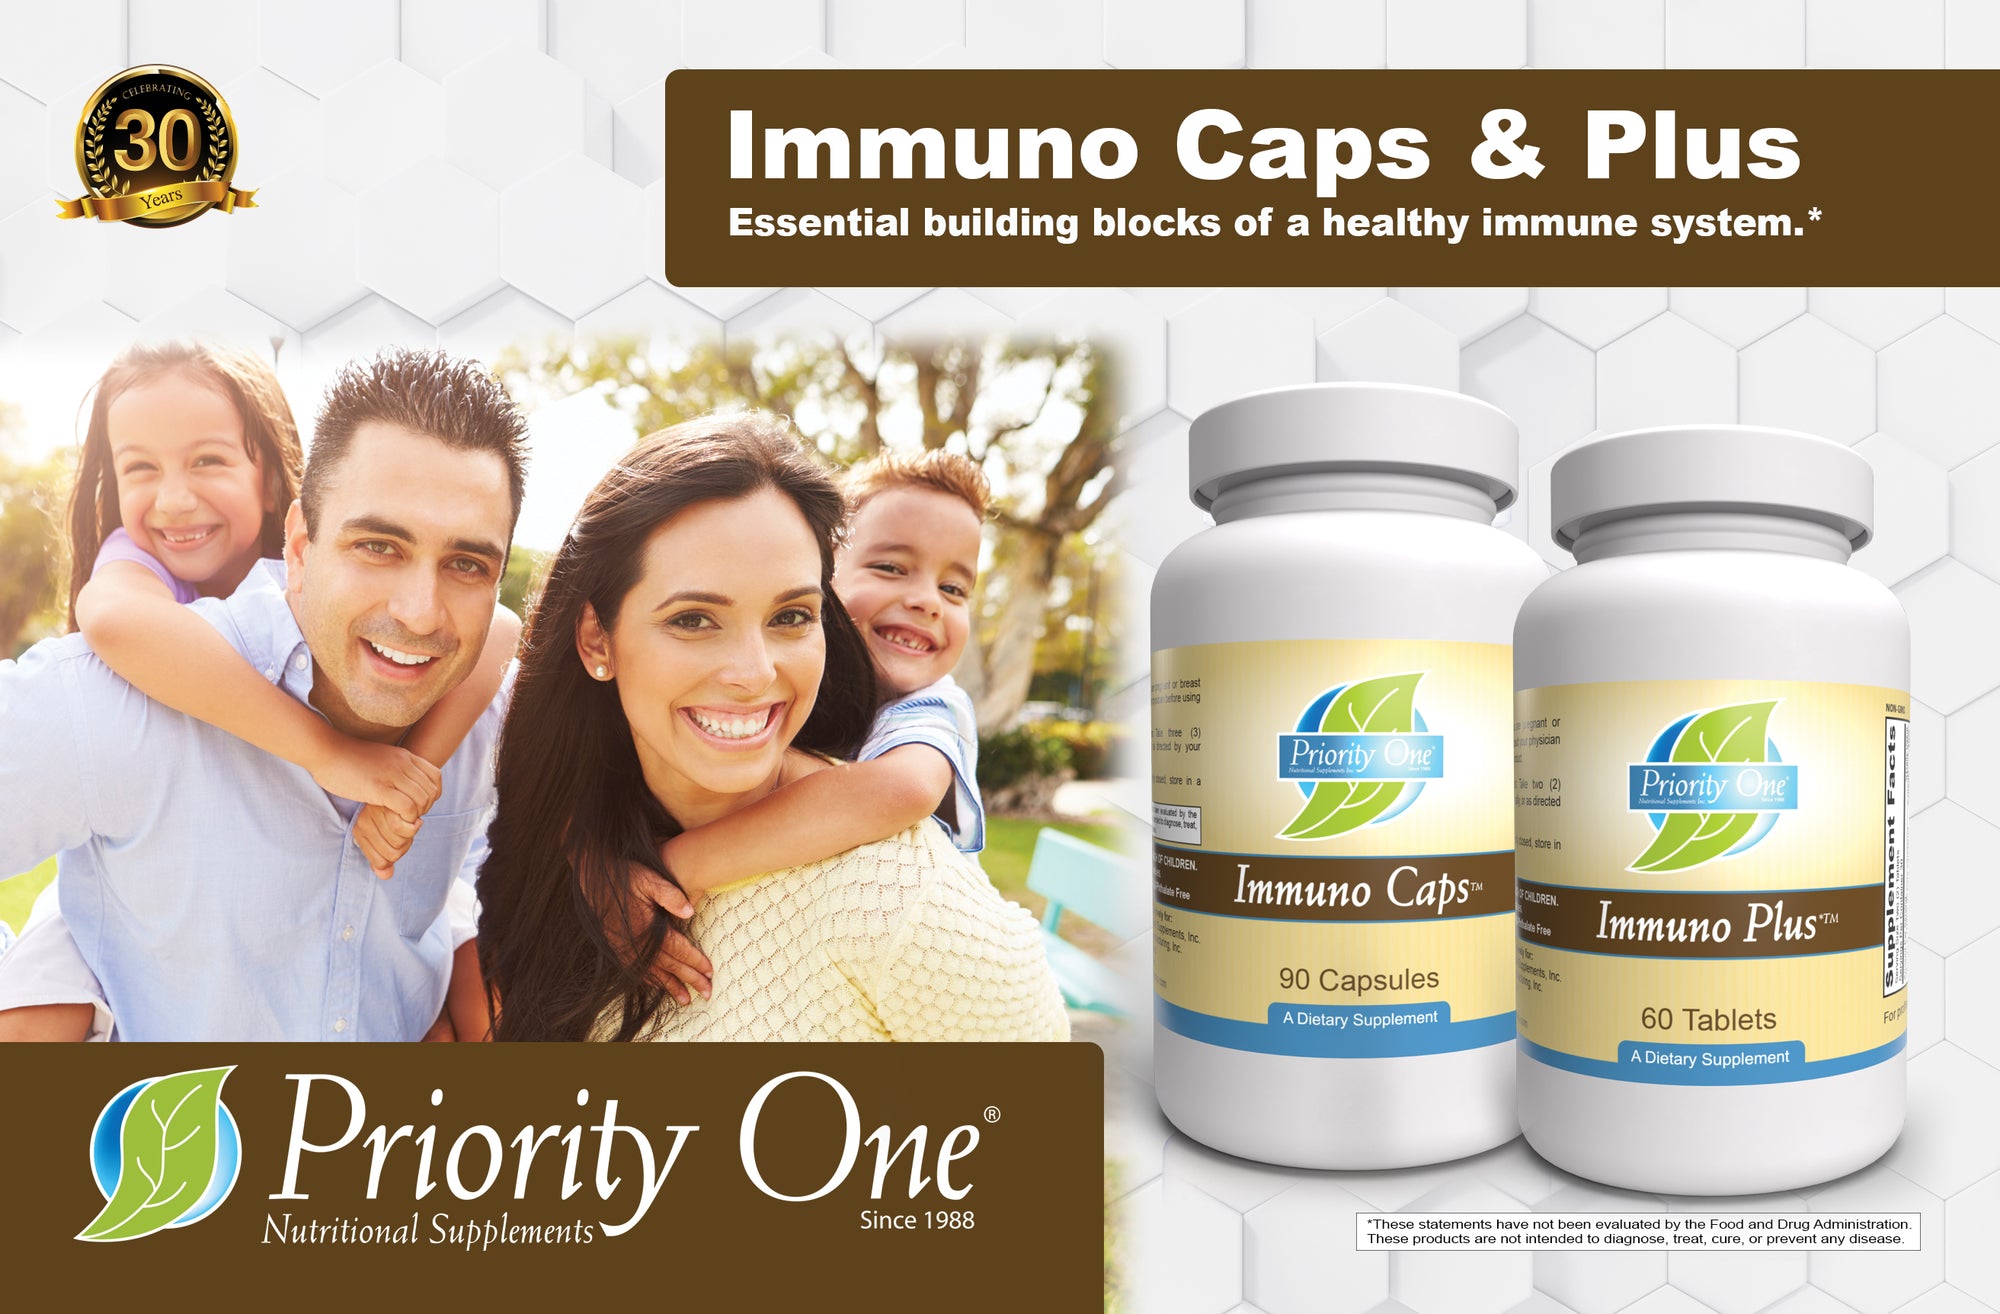 Smiling family picture with children, bottle pictures of Immuno Caps and Immunp Plus, Essential building blocks of a healthy immune system.